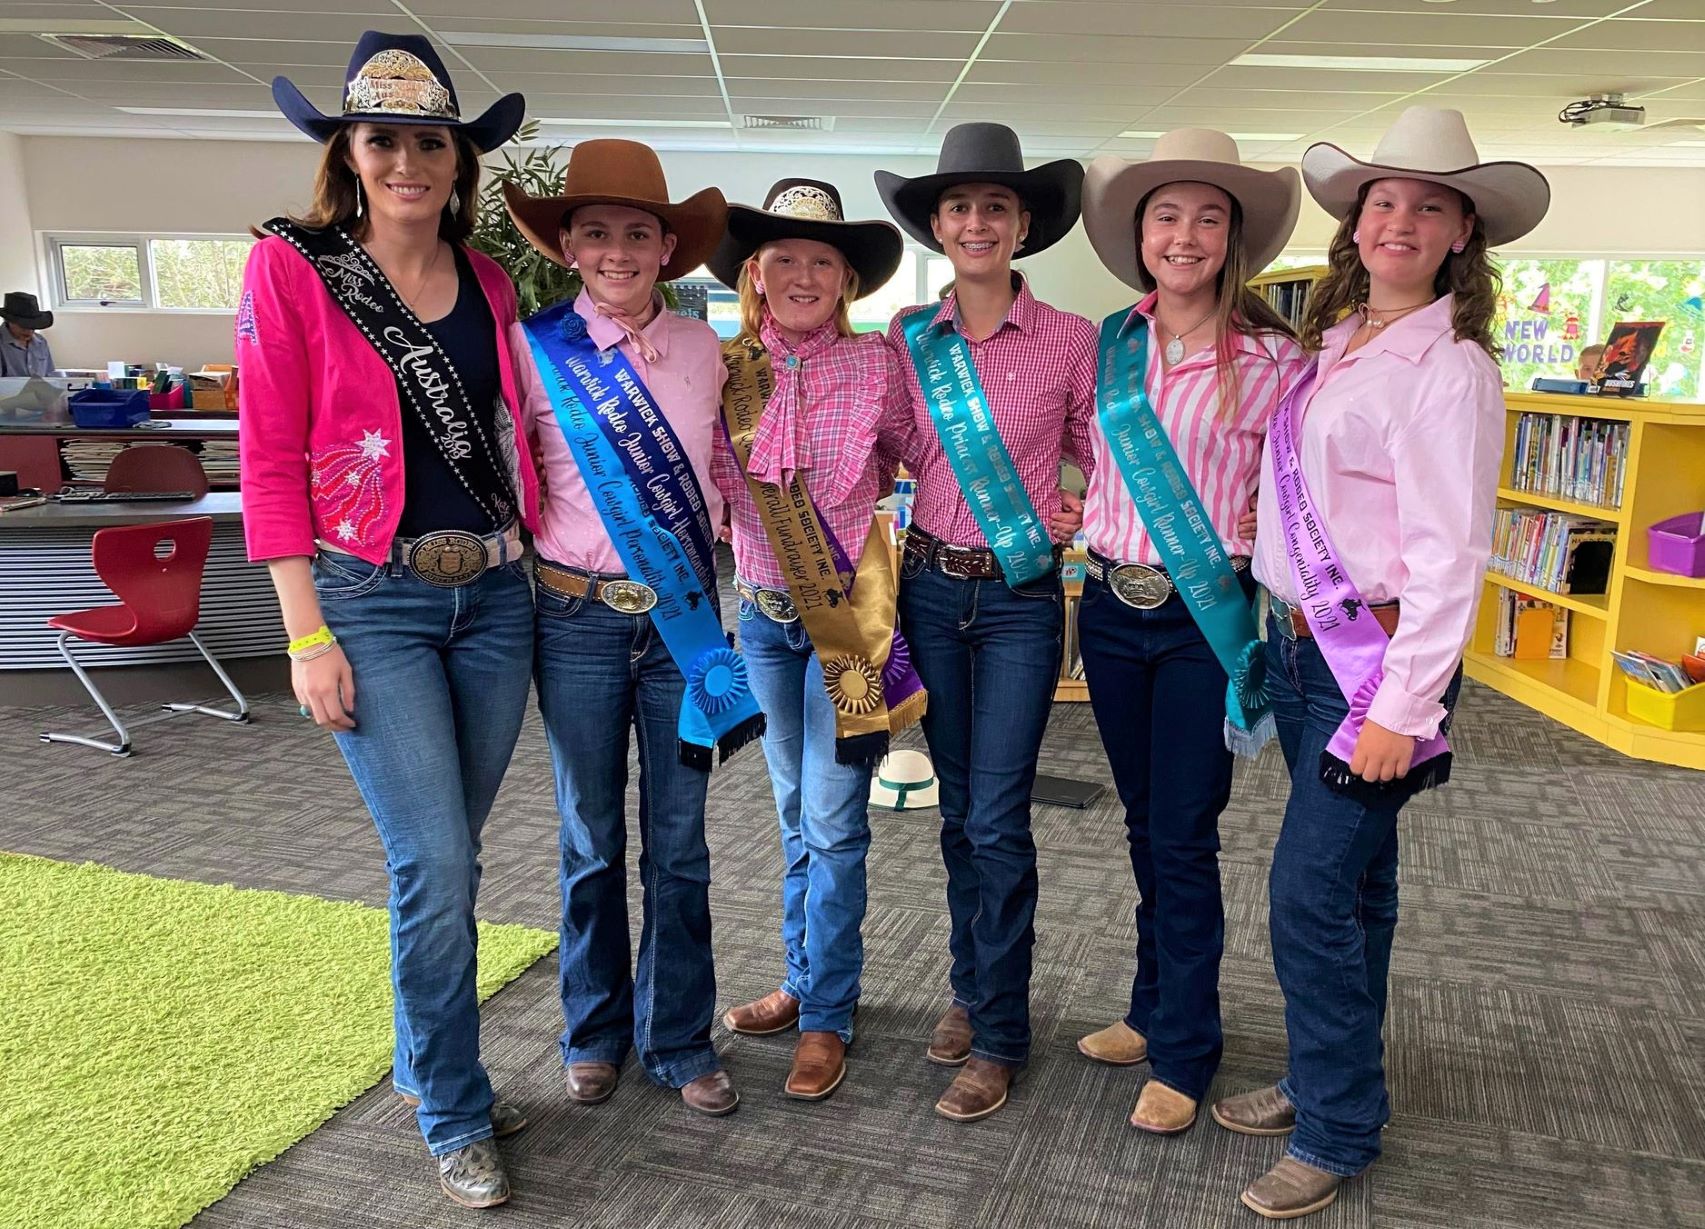 Rodeo Royals visit SCOTS featured image